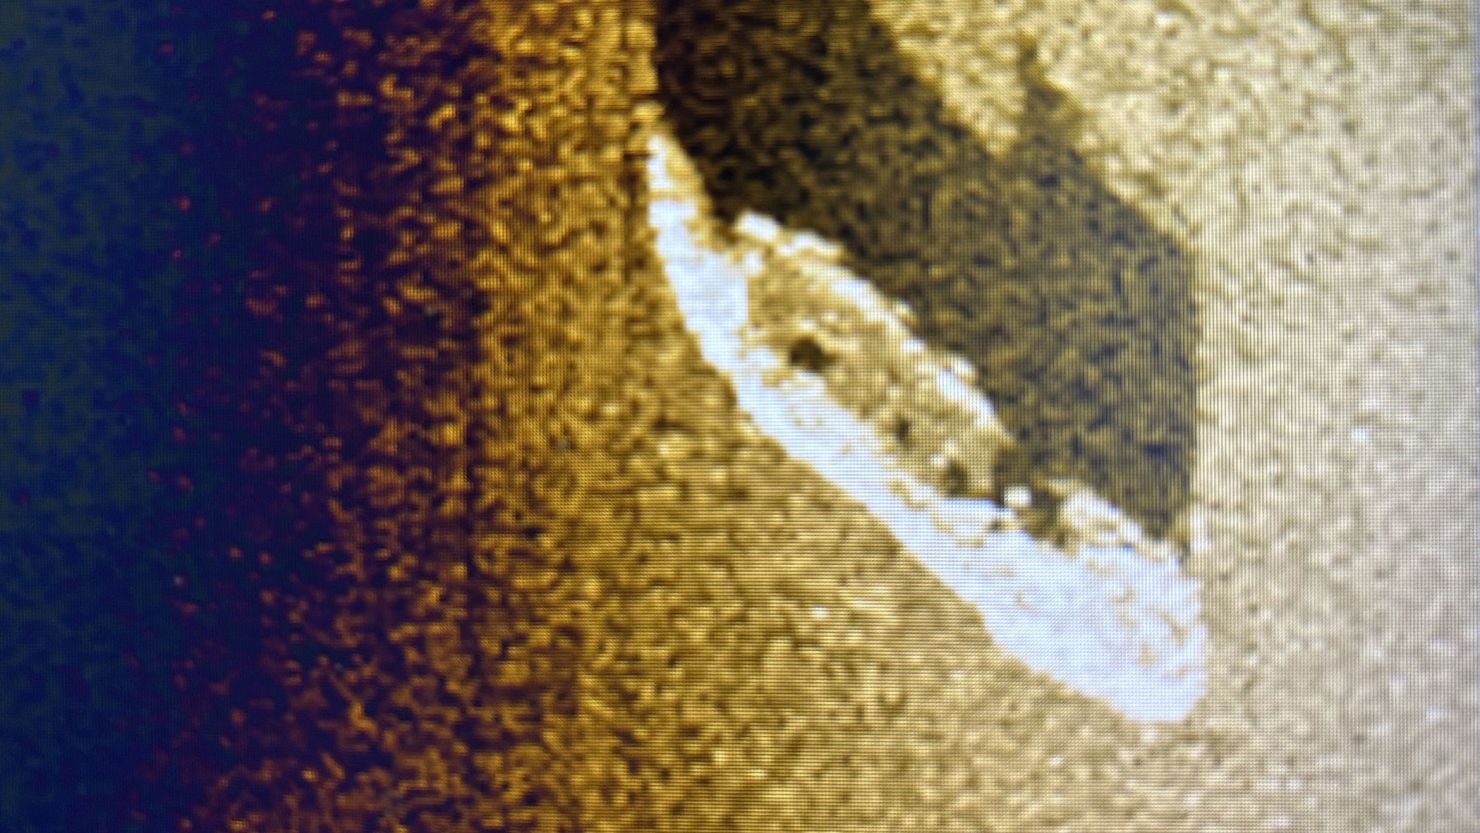 A scan of the Milwaukee, which sank in July 1886 after colliding with another vessel.